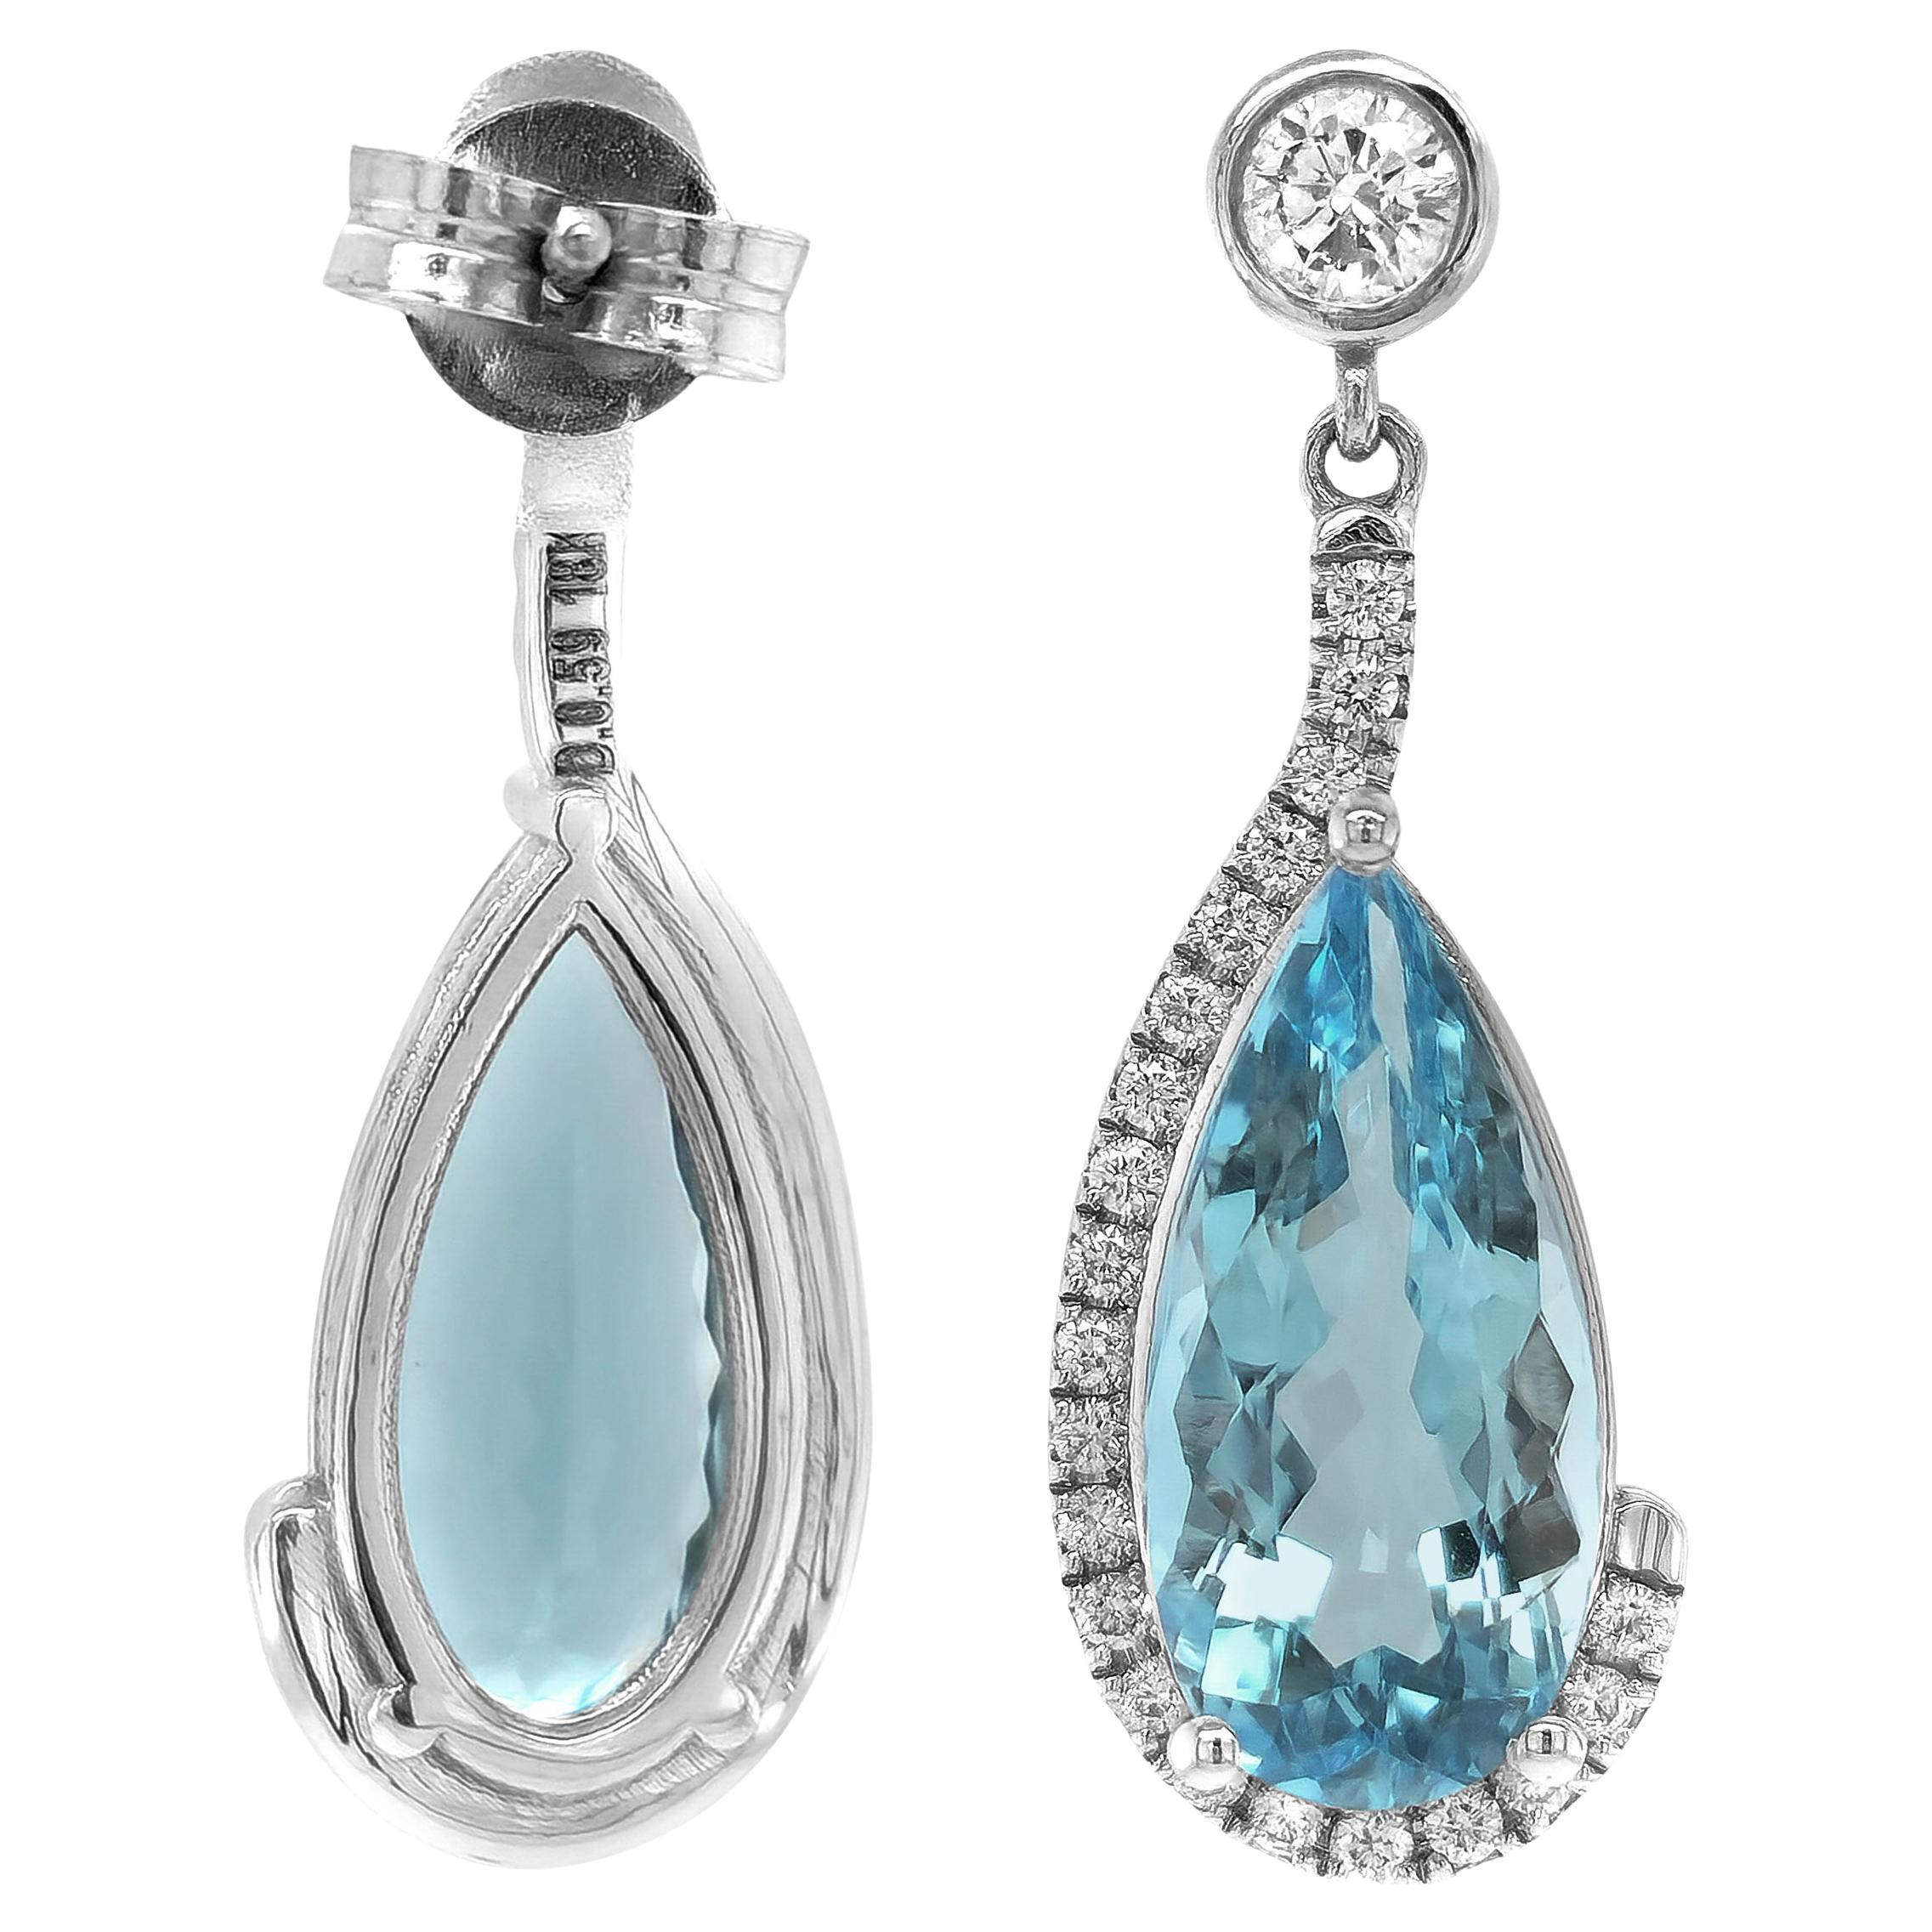 Introducing our bespoke 18K white gold dangle earrings, a timeless masterpiece of meticulous craftsmanship. Radiating a rich shine and attention to detail, they showcase two pear-shaped natural aquamarines with a captivating oceanic-sky blue hue.